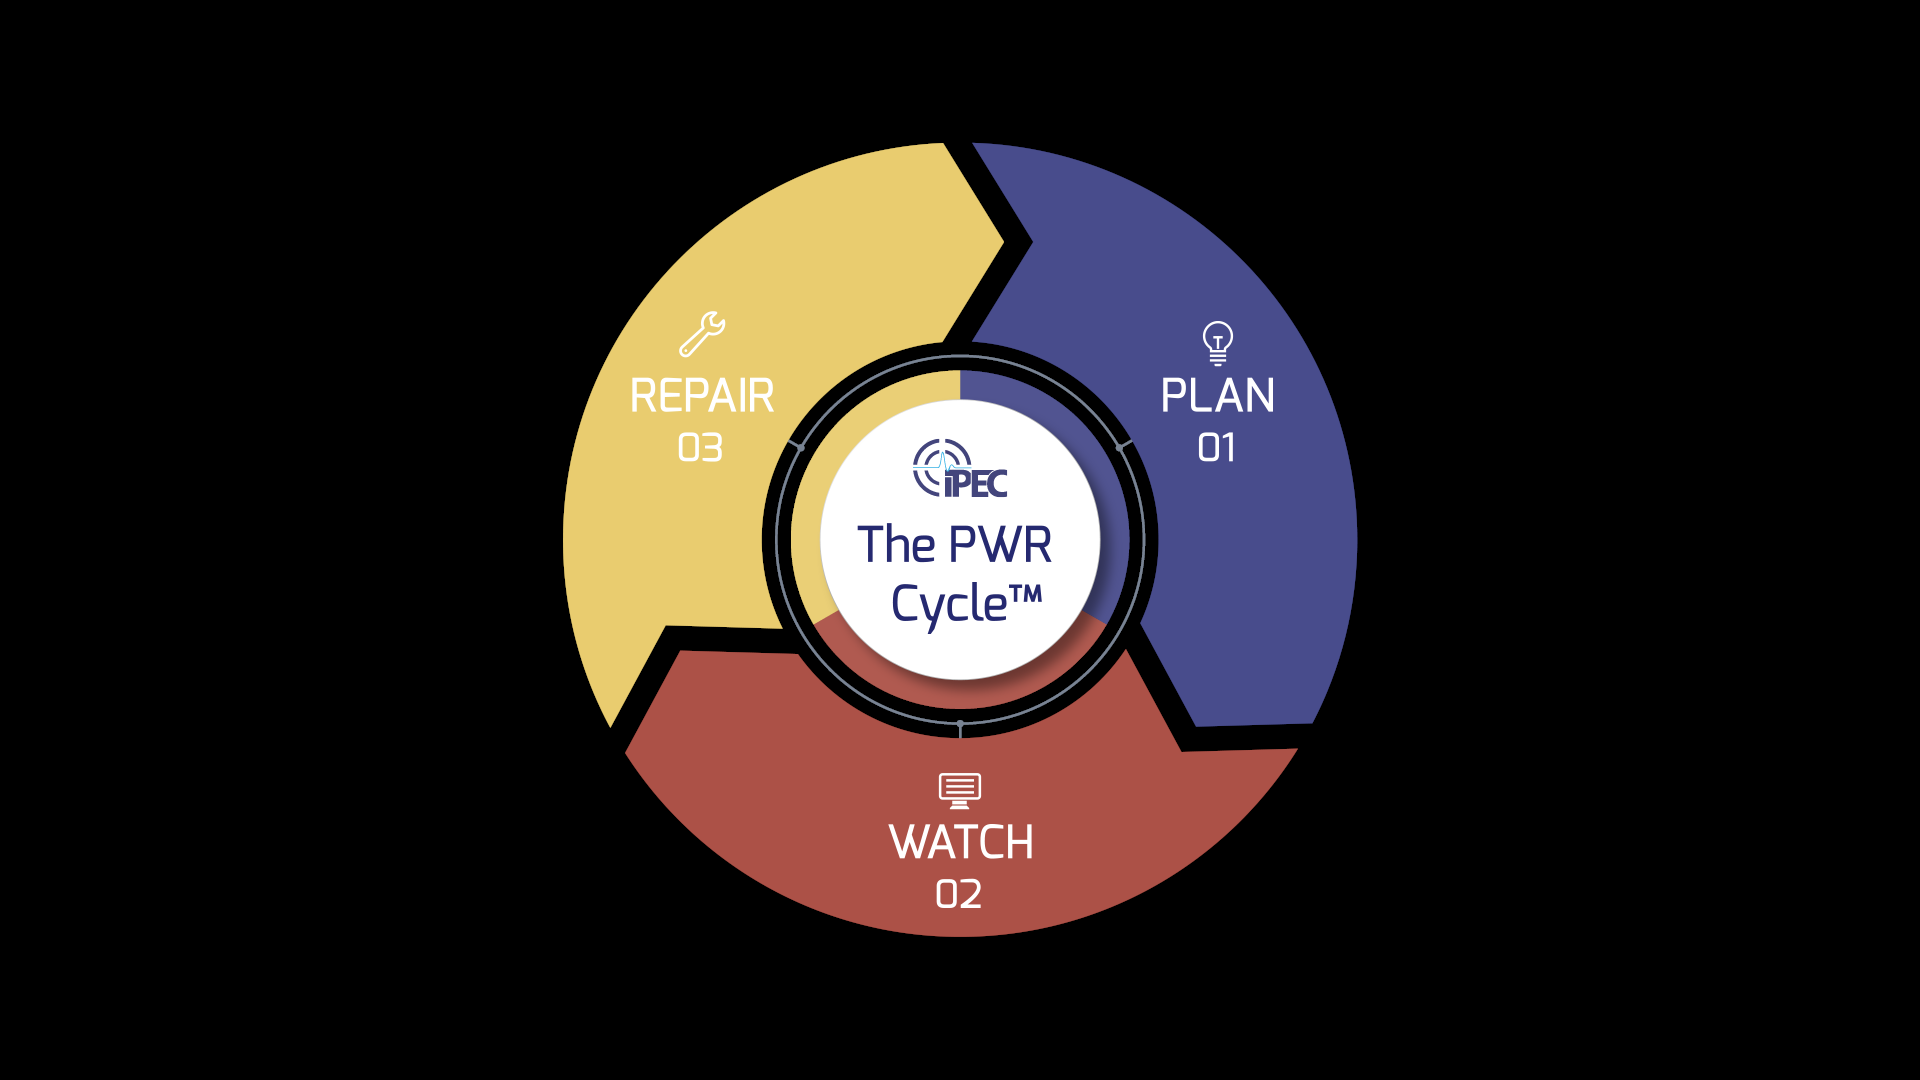 The PWR Cycle - Condition Based Maintenance